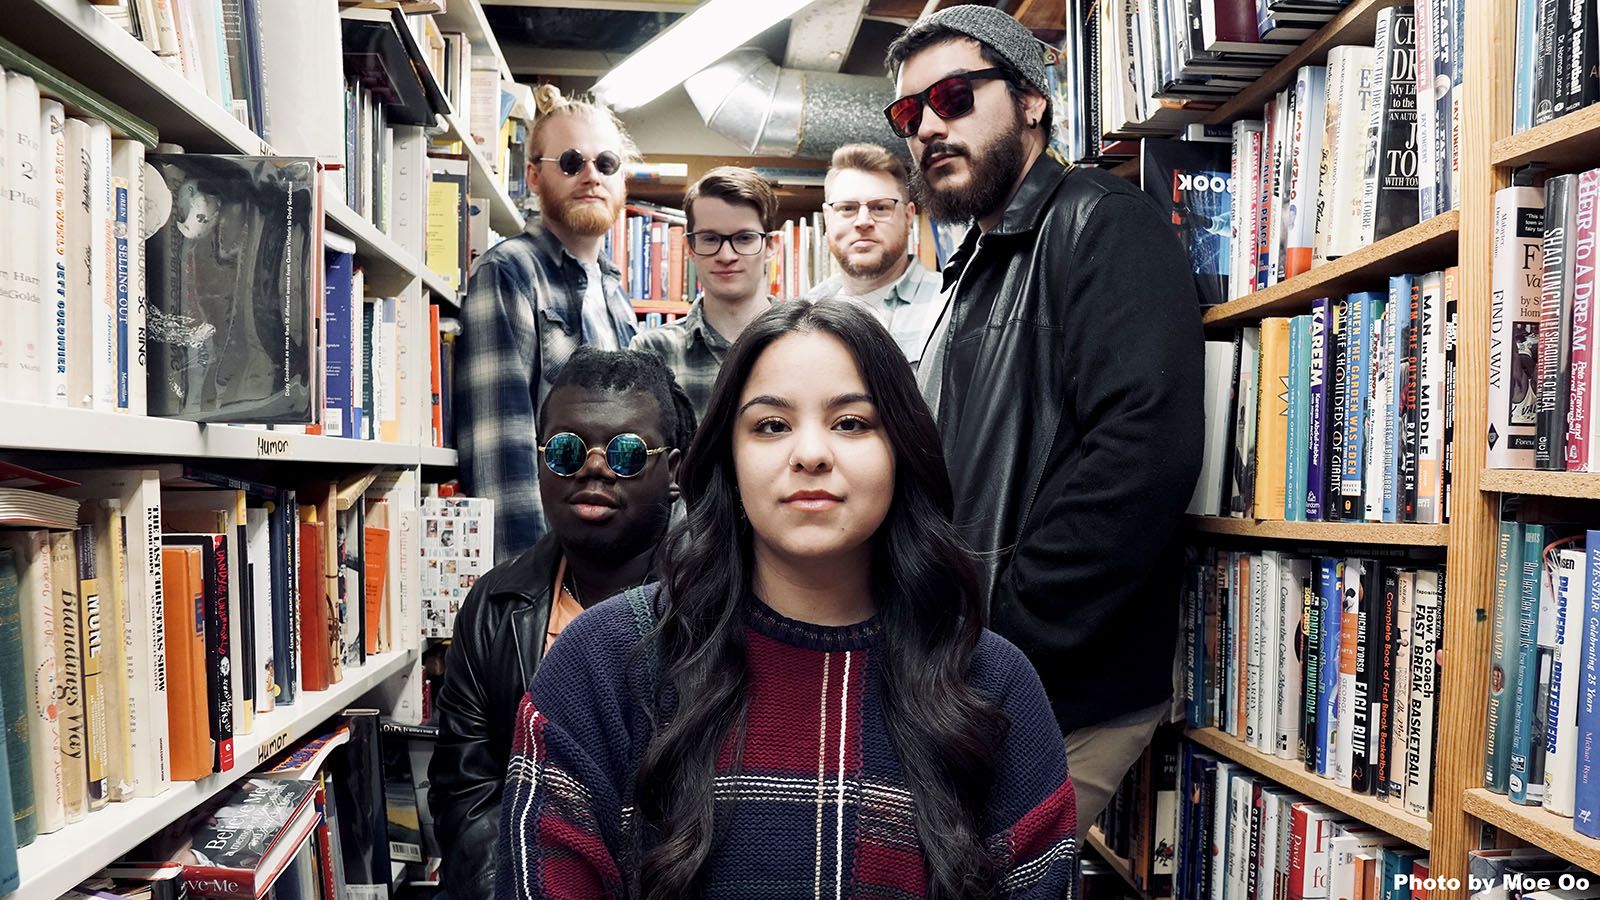 The neo-soul band Sun.Dyle have organized Celestial Fest, which brings together eight local bands, vendors, and food trucks at Ambrosia Orchard in Hoagland on May 4.